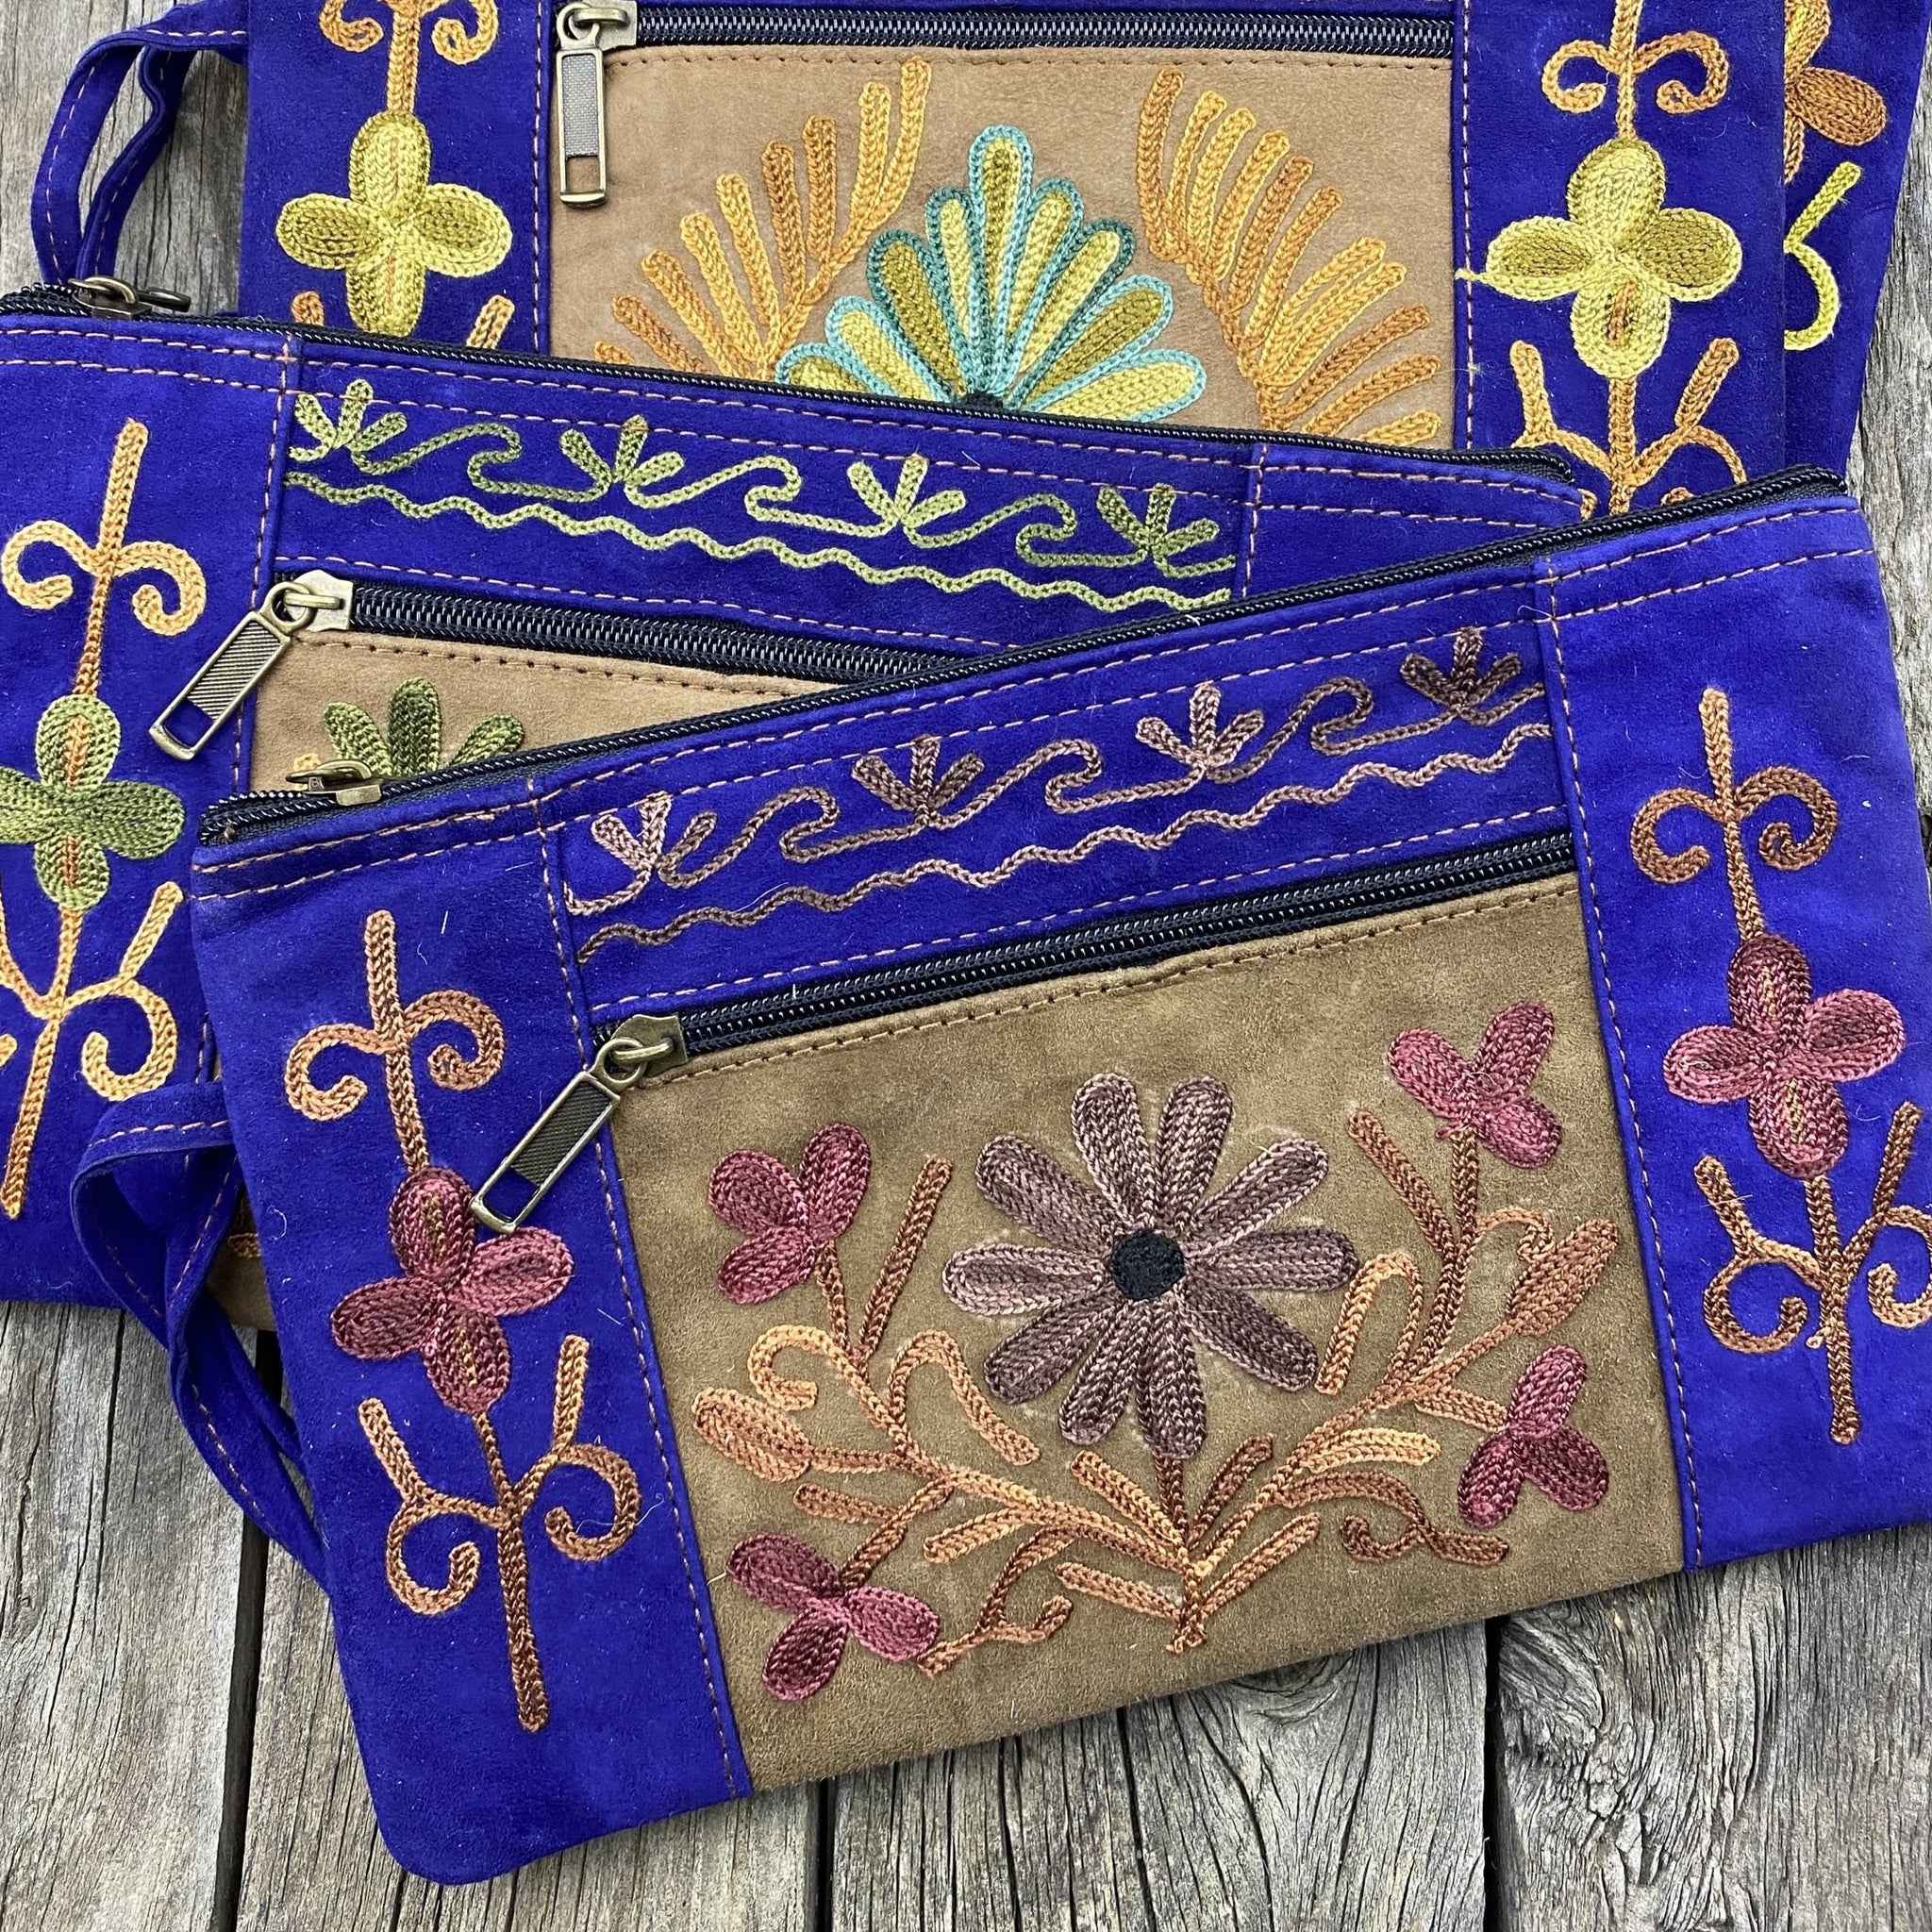 Fair Trade Ethical Embroidered Suede Clutch Purse Electric Blue-Assorted